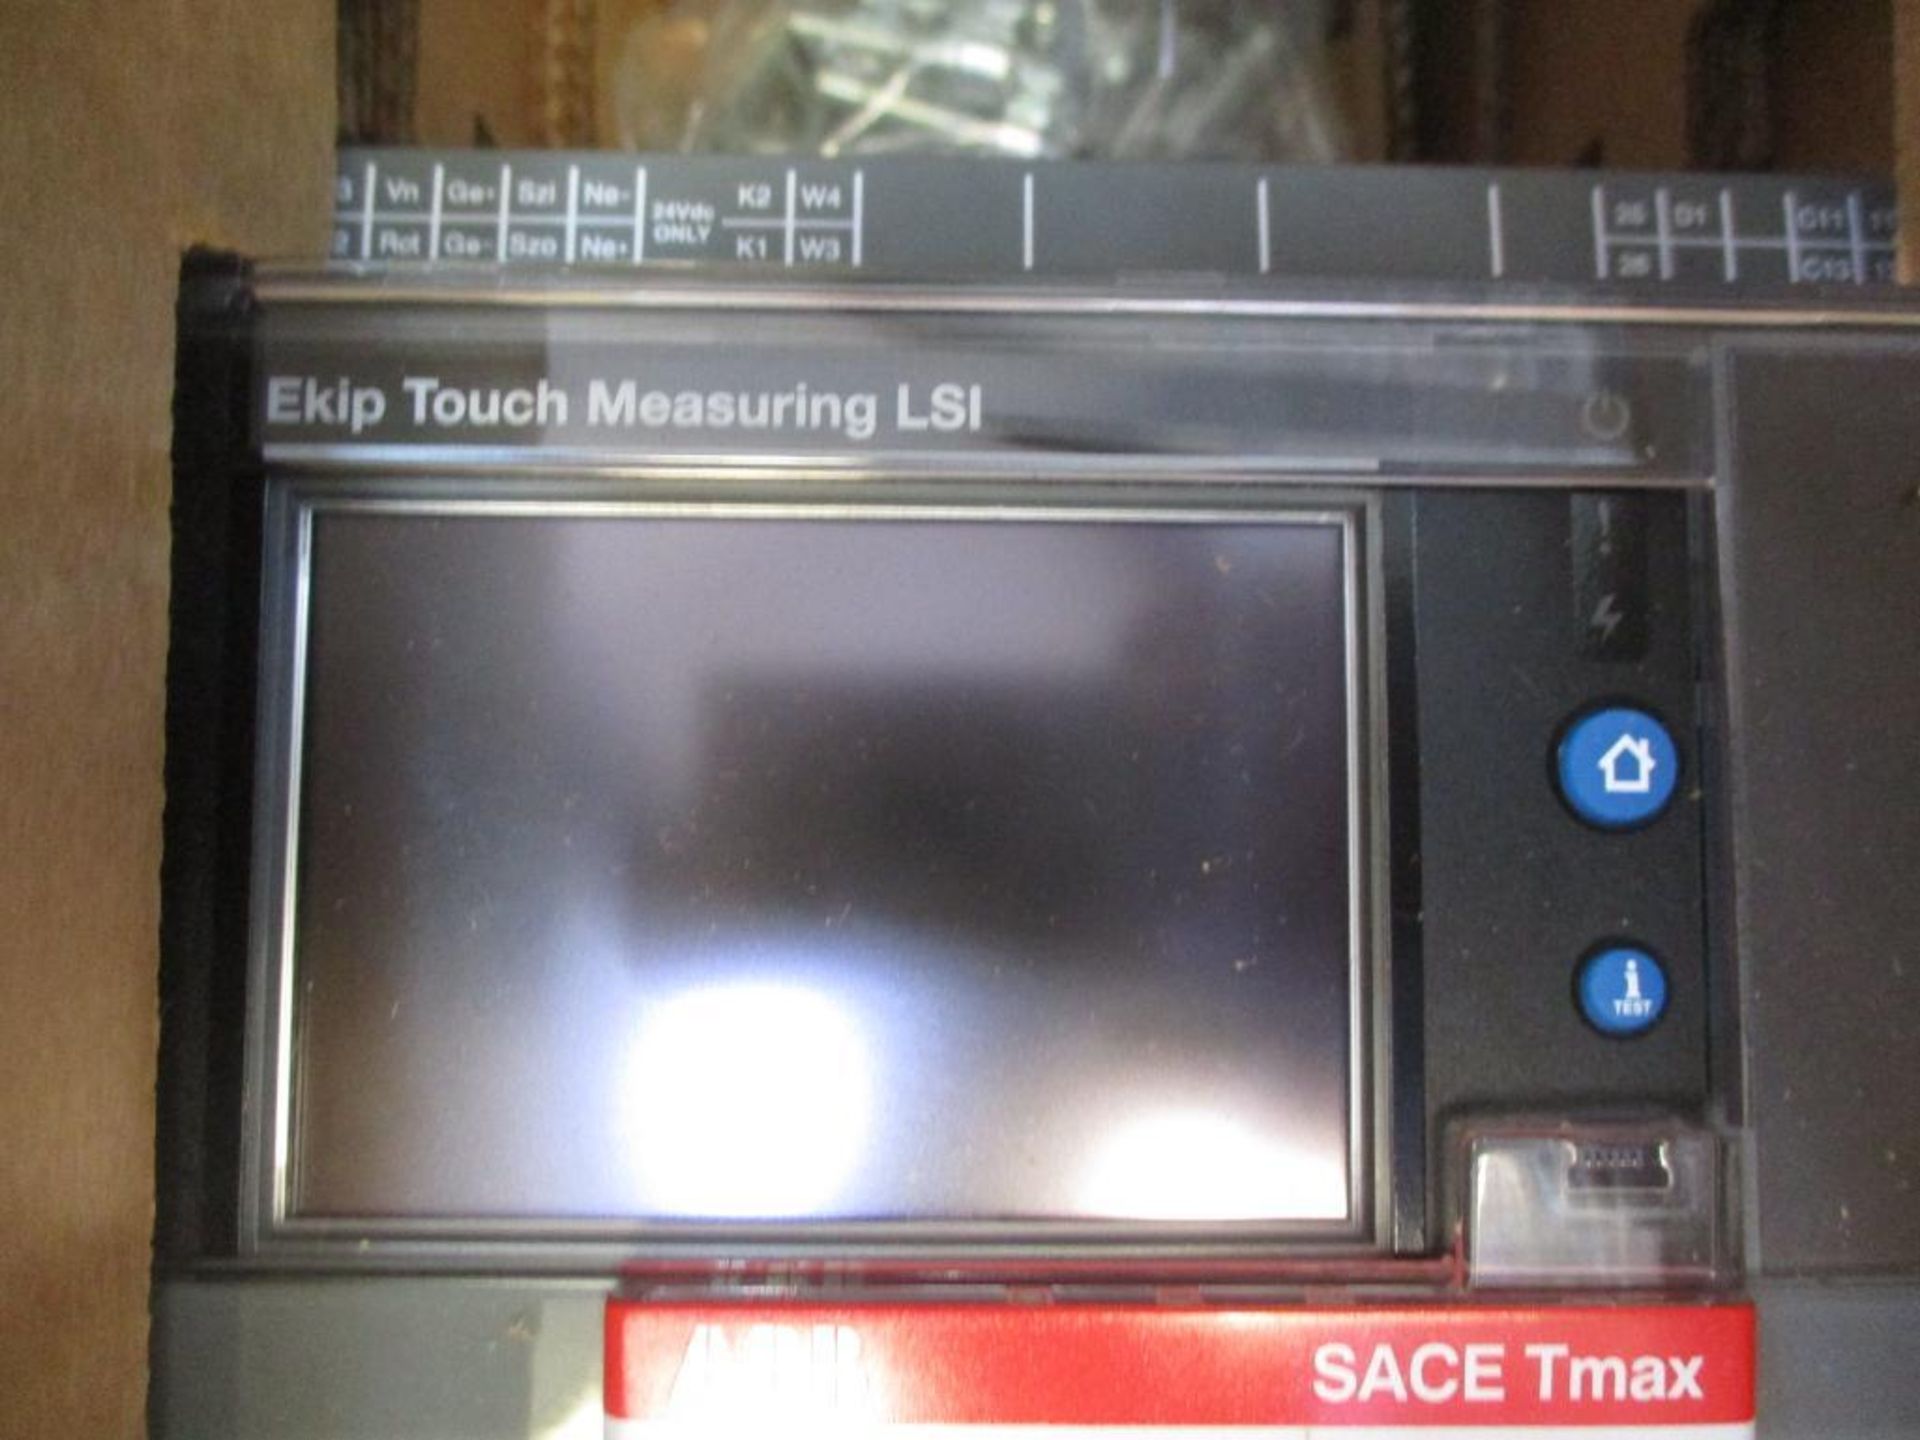 ABB 800 AMP Circuit Breaker, SACE TMAX XT7 H 800, EKIP Touch Measuring LSI 3-Pole (New in Box) - Image 3 of 4